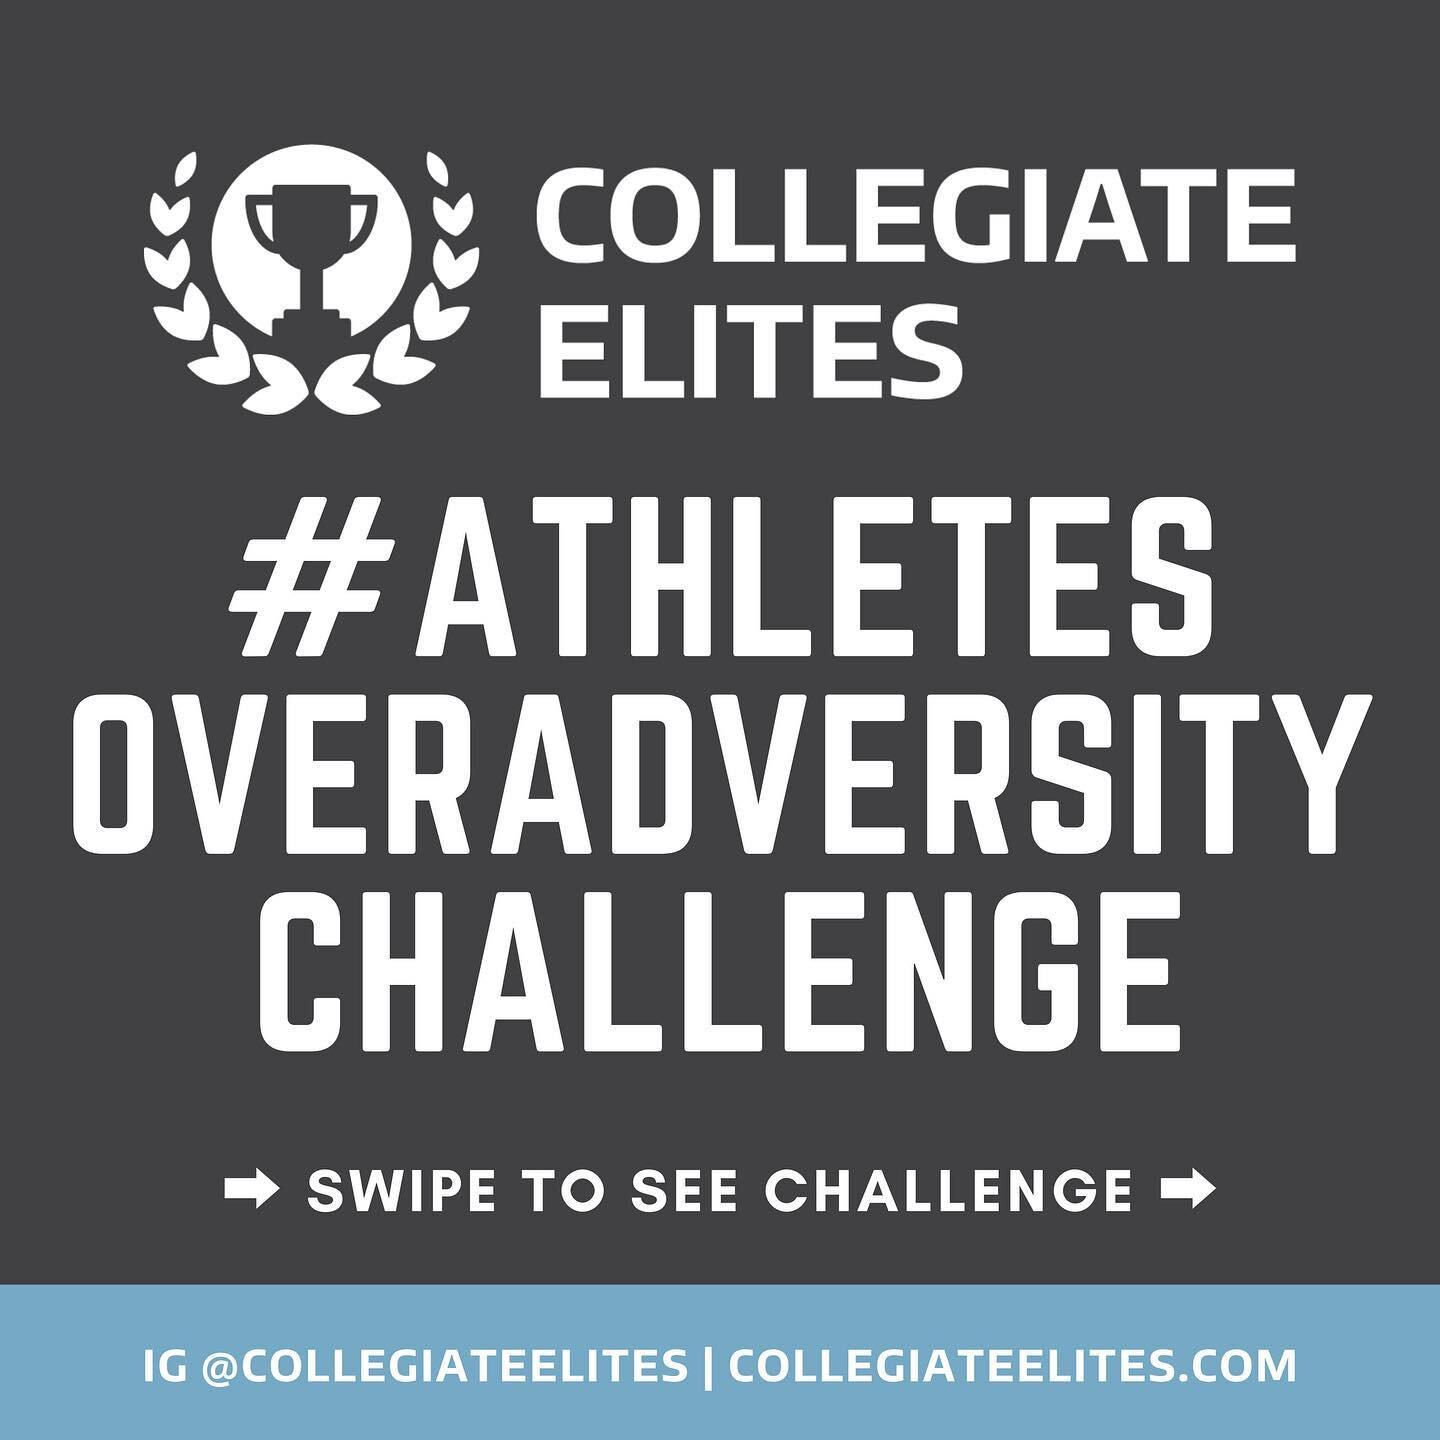 The @CollegiateElites #athletesoveradversitychallenge
.
During times of adversity everyone can use a little inspiration. Accept the @collegiateelites #athletesoveradversitychallenge and tell your athlete story of how you faced adversity and overcame 